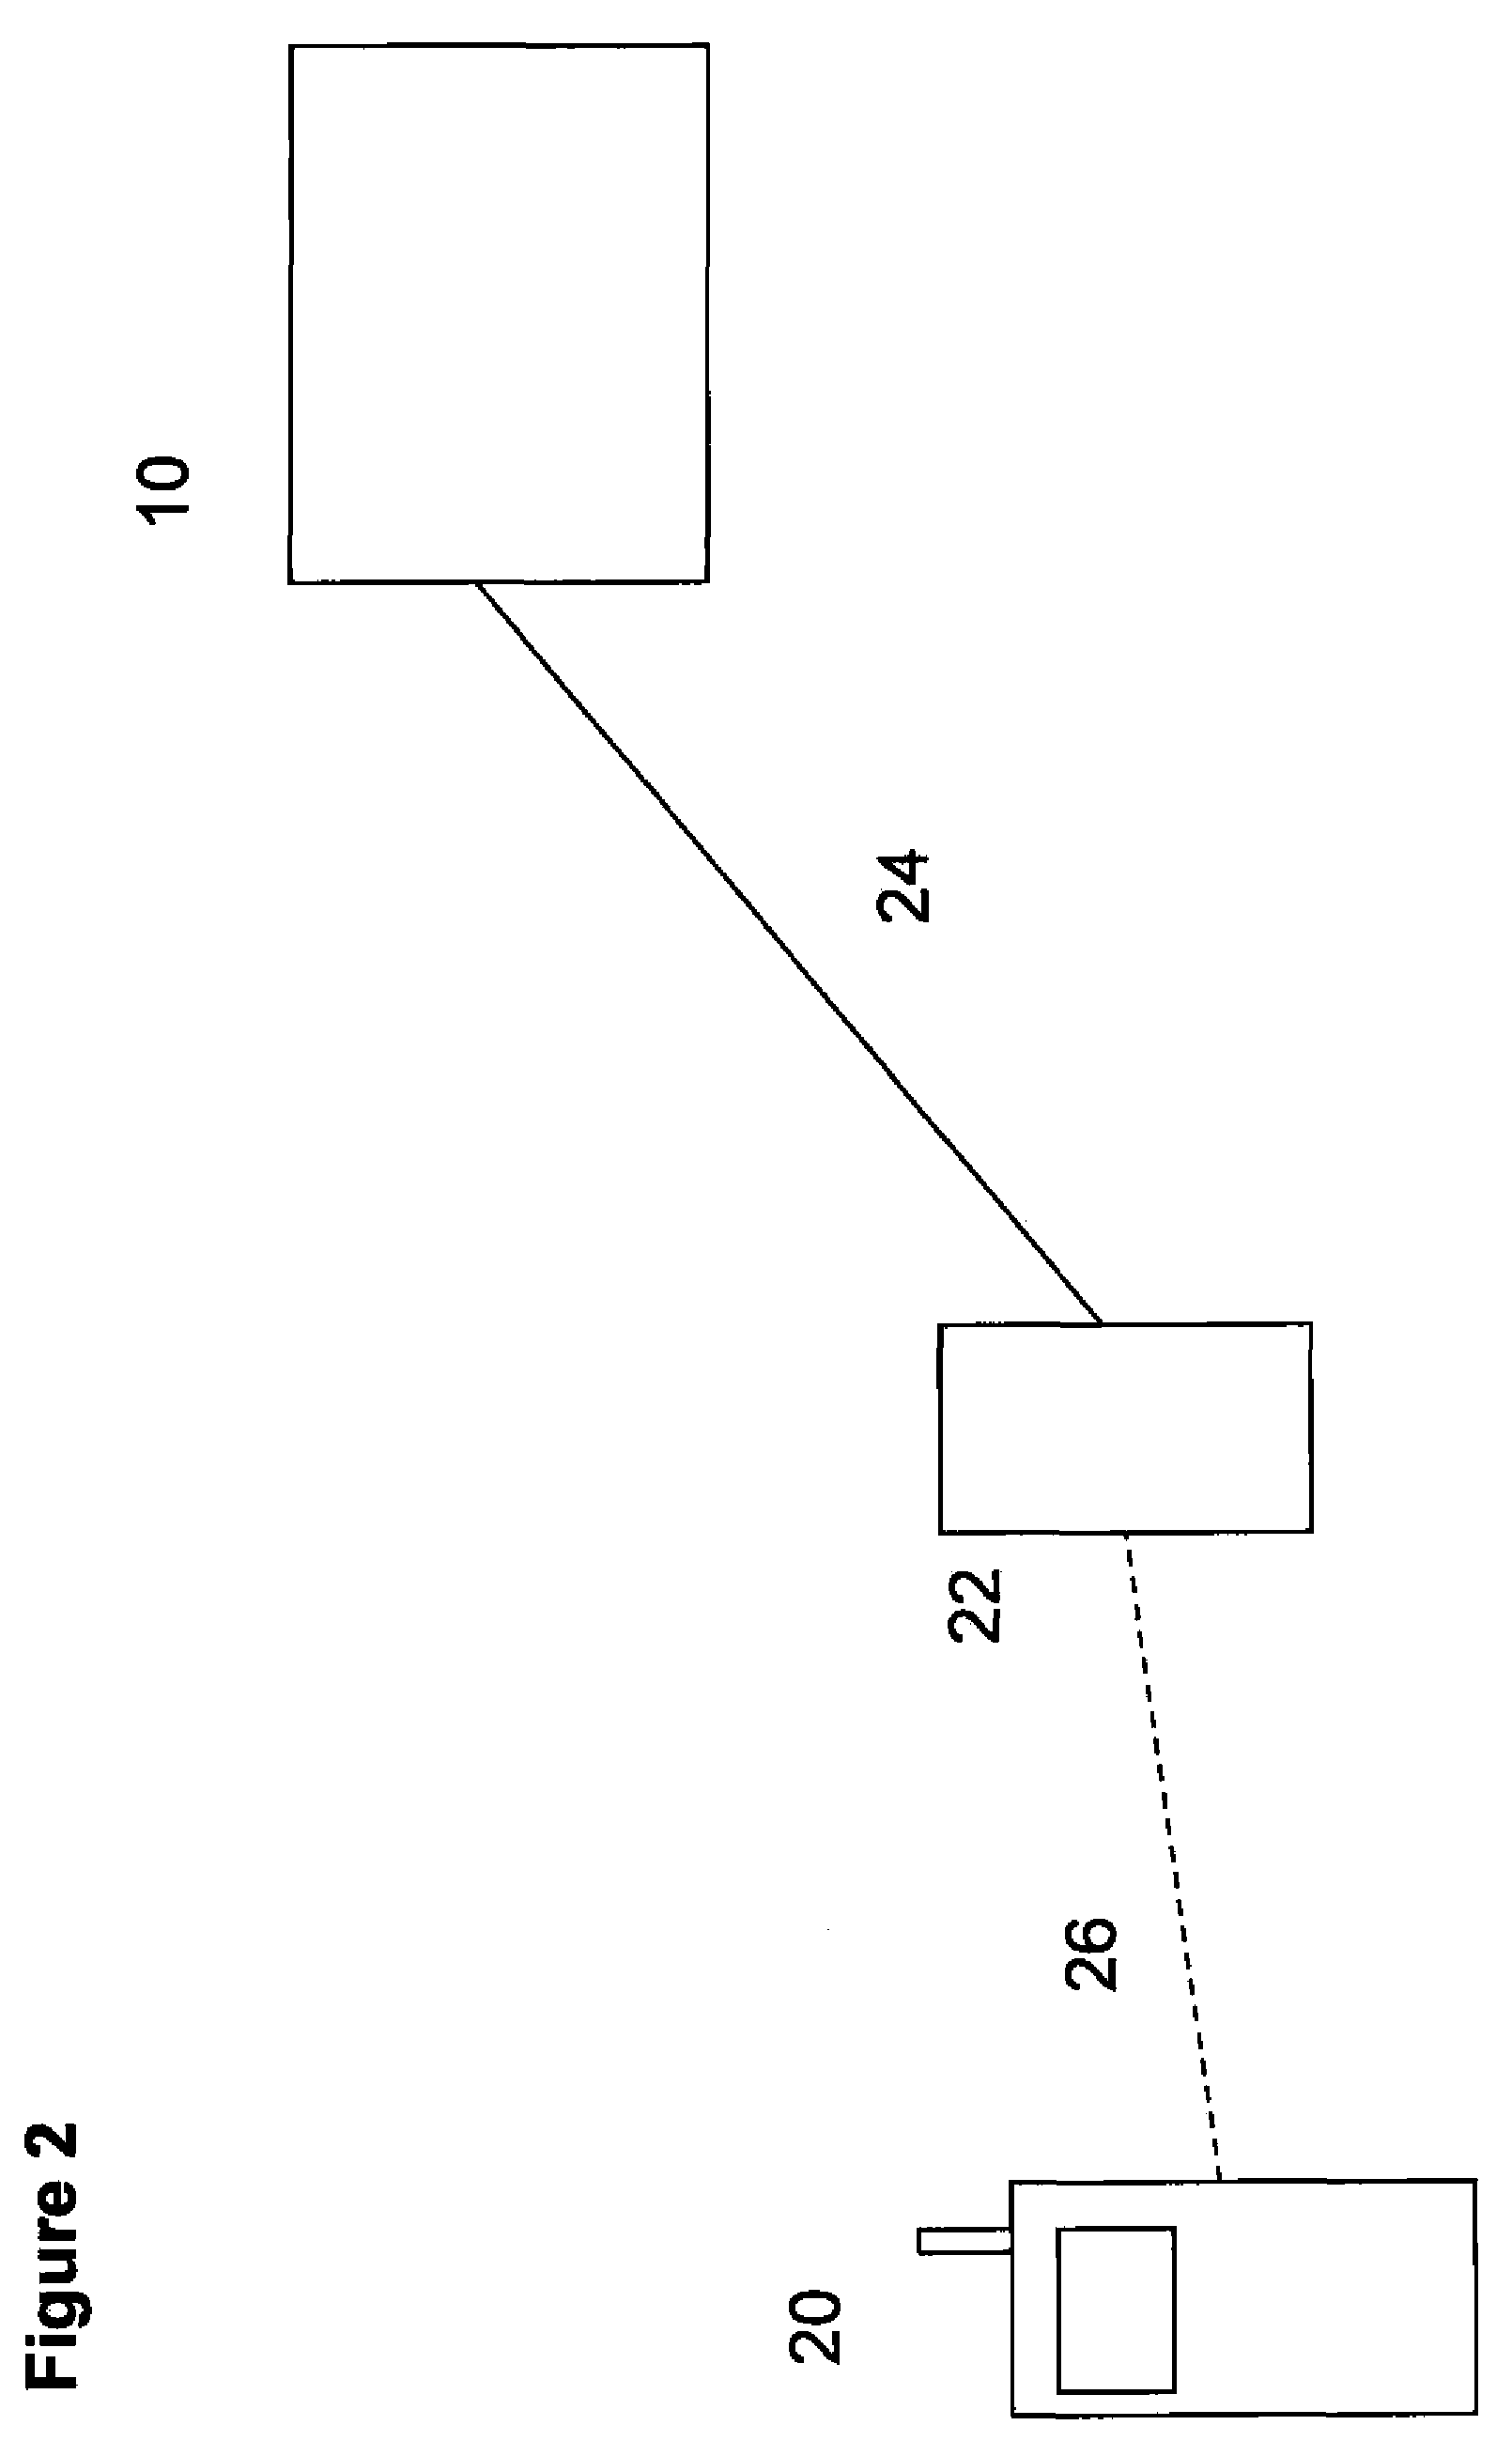 Method and apparatus for transferring digital content from a personal computer to a mobile handset